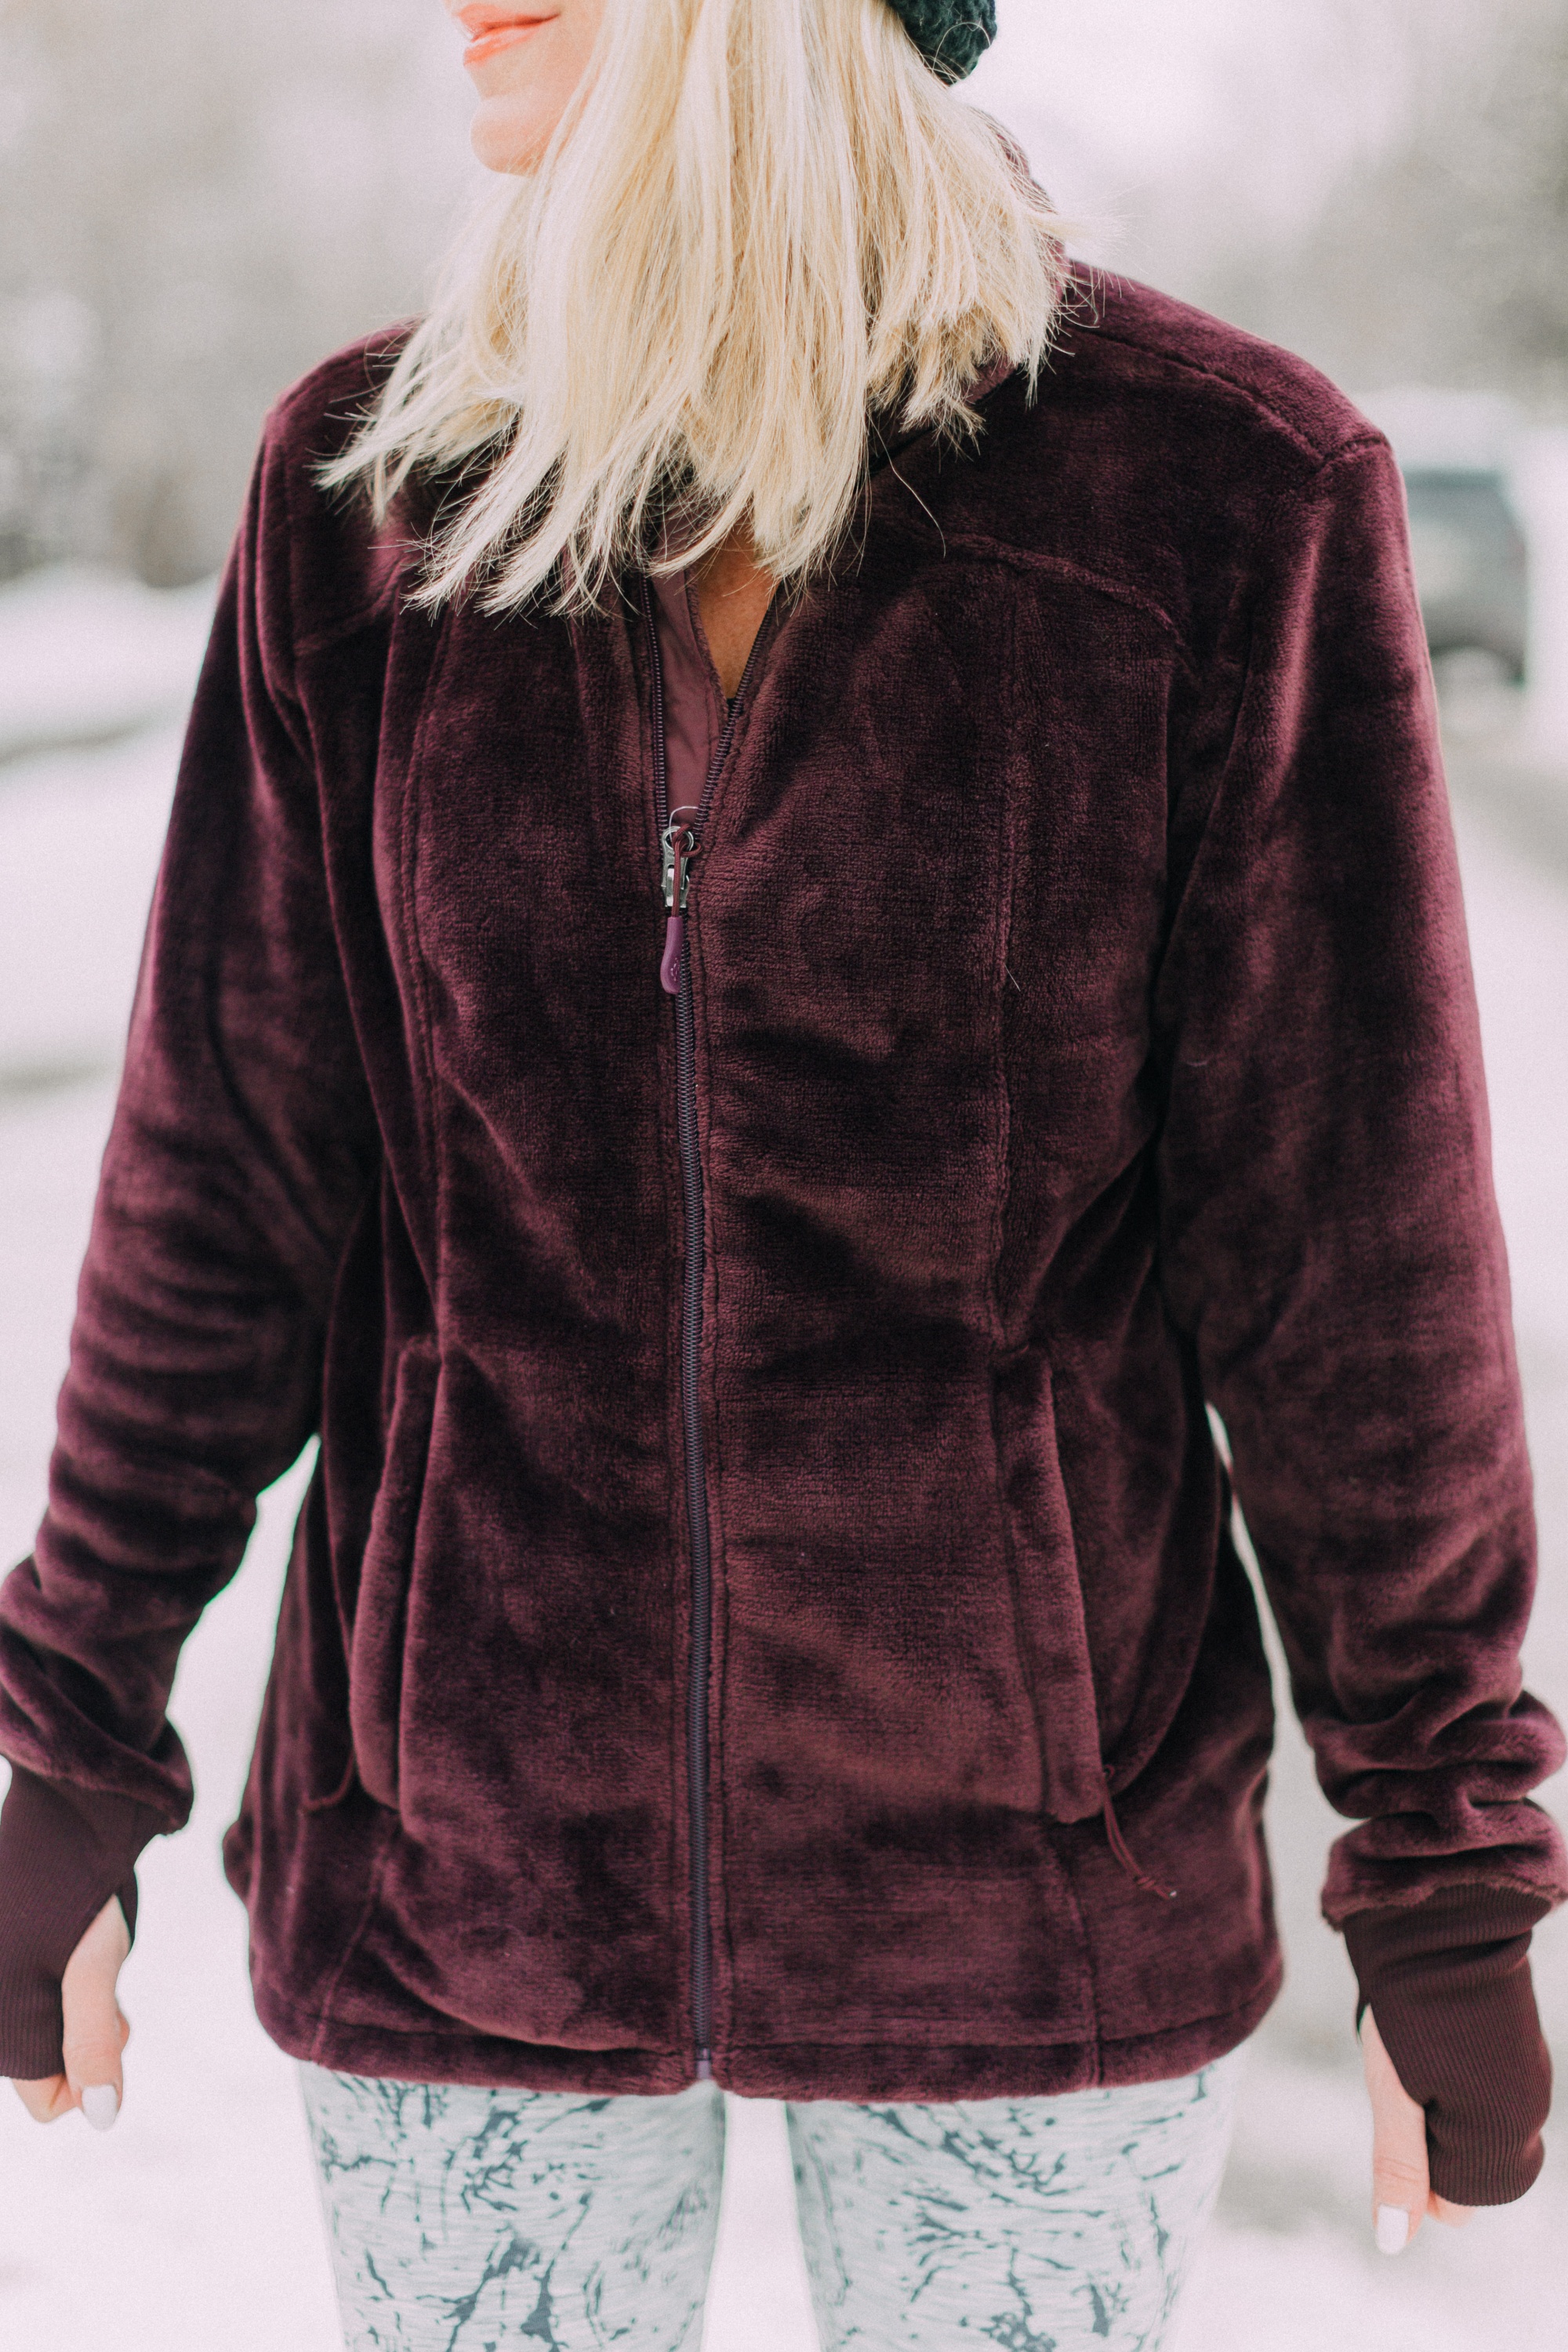 Reversible leggings and burgundy fleece jacket from Jockey worn by fashion blogger Erin Busbee of BusbeeStyle.com in Telluride, CO